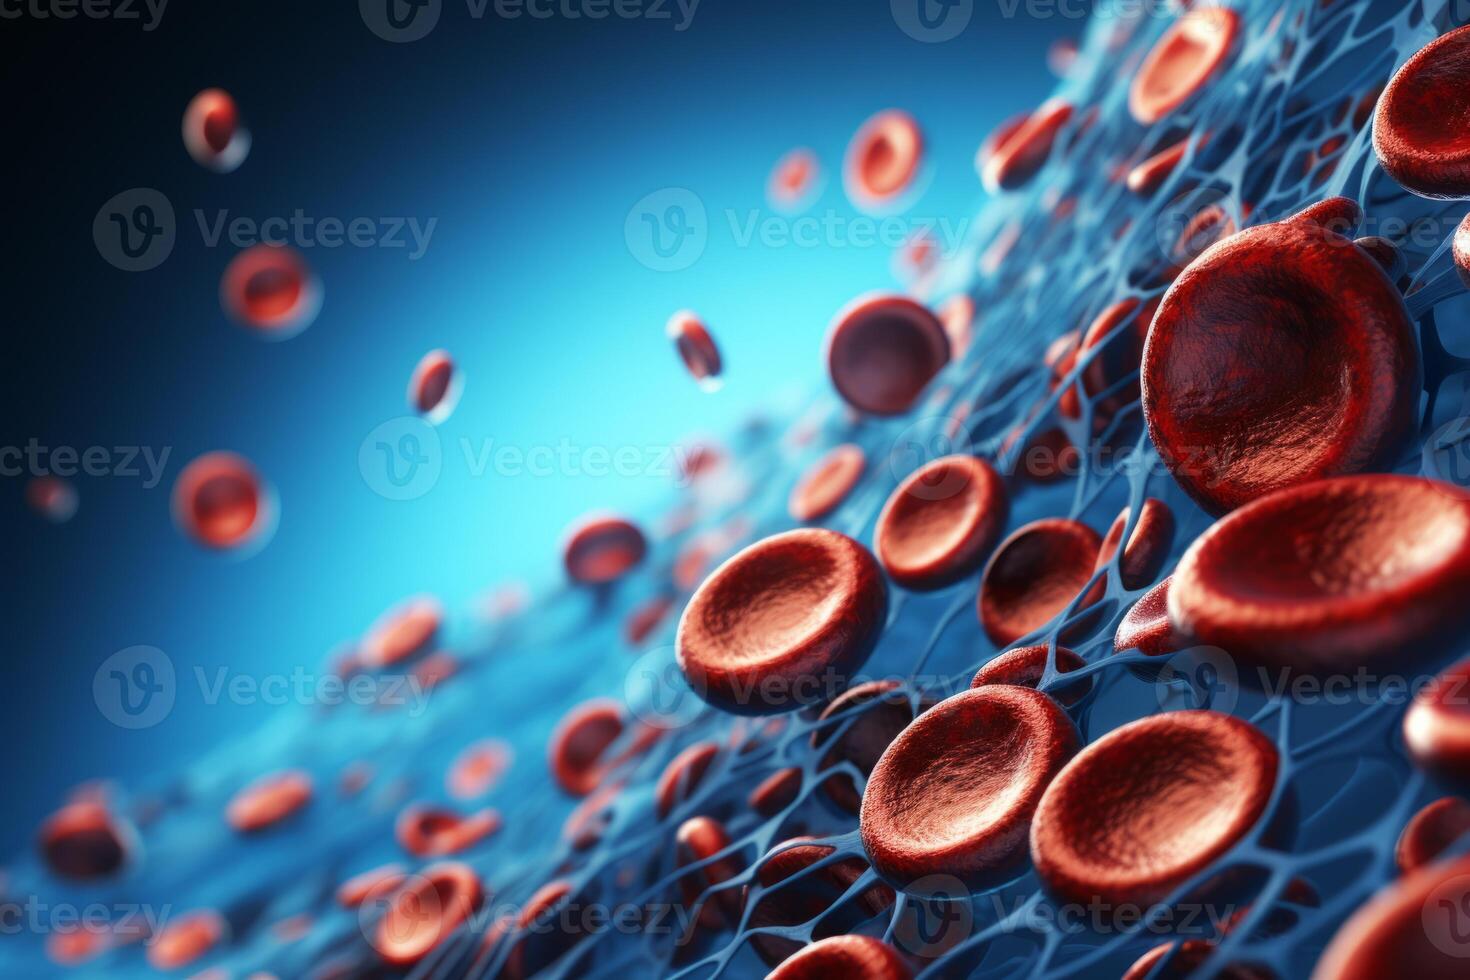 AI Generated Red blood cells arterial blood stream health biology anatomy physiology microscopic microbiology science medical treatment human vein circulation pressure level life cell organic photo